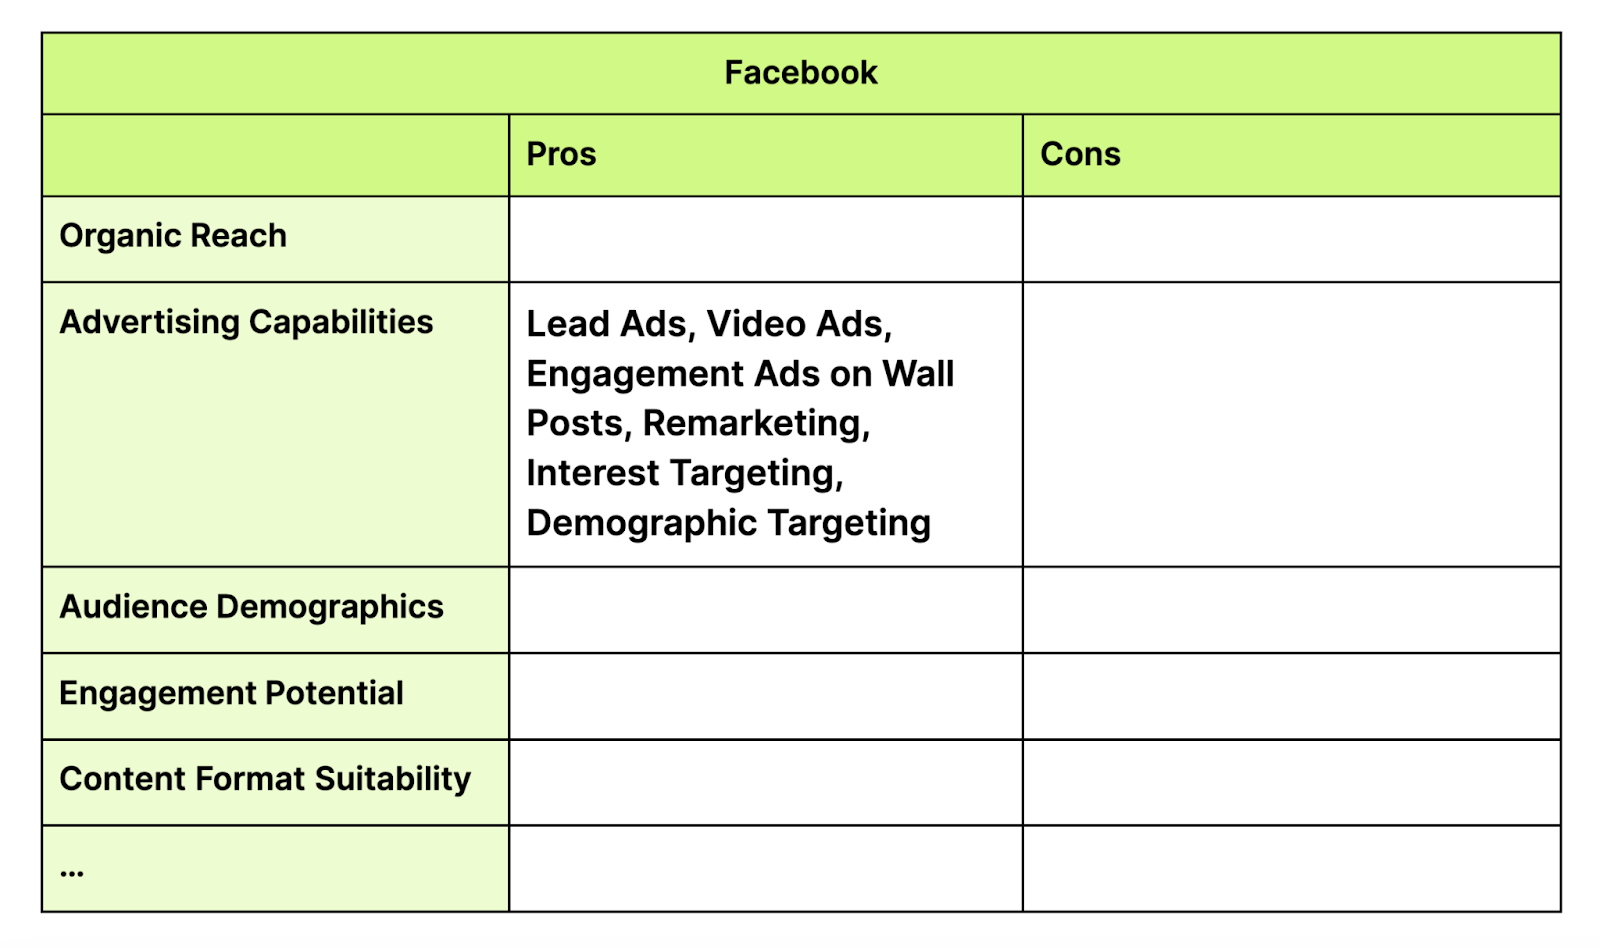 Facebook pros and cons section in the social media strategy plan template